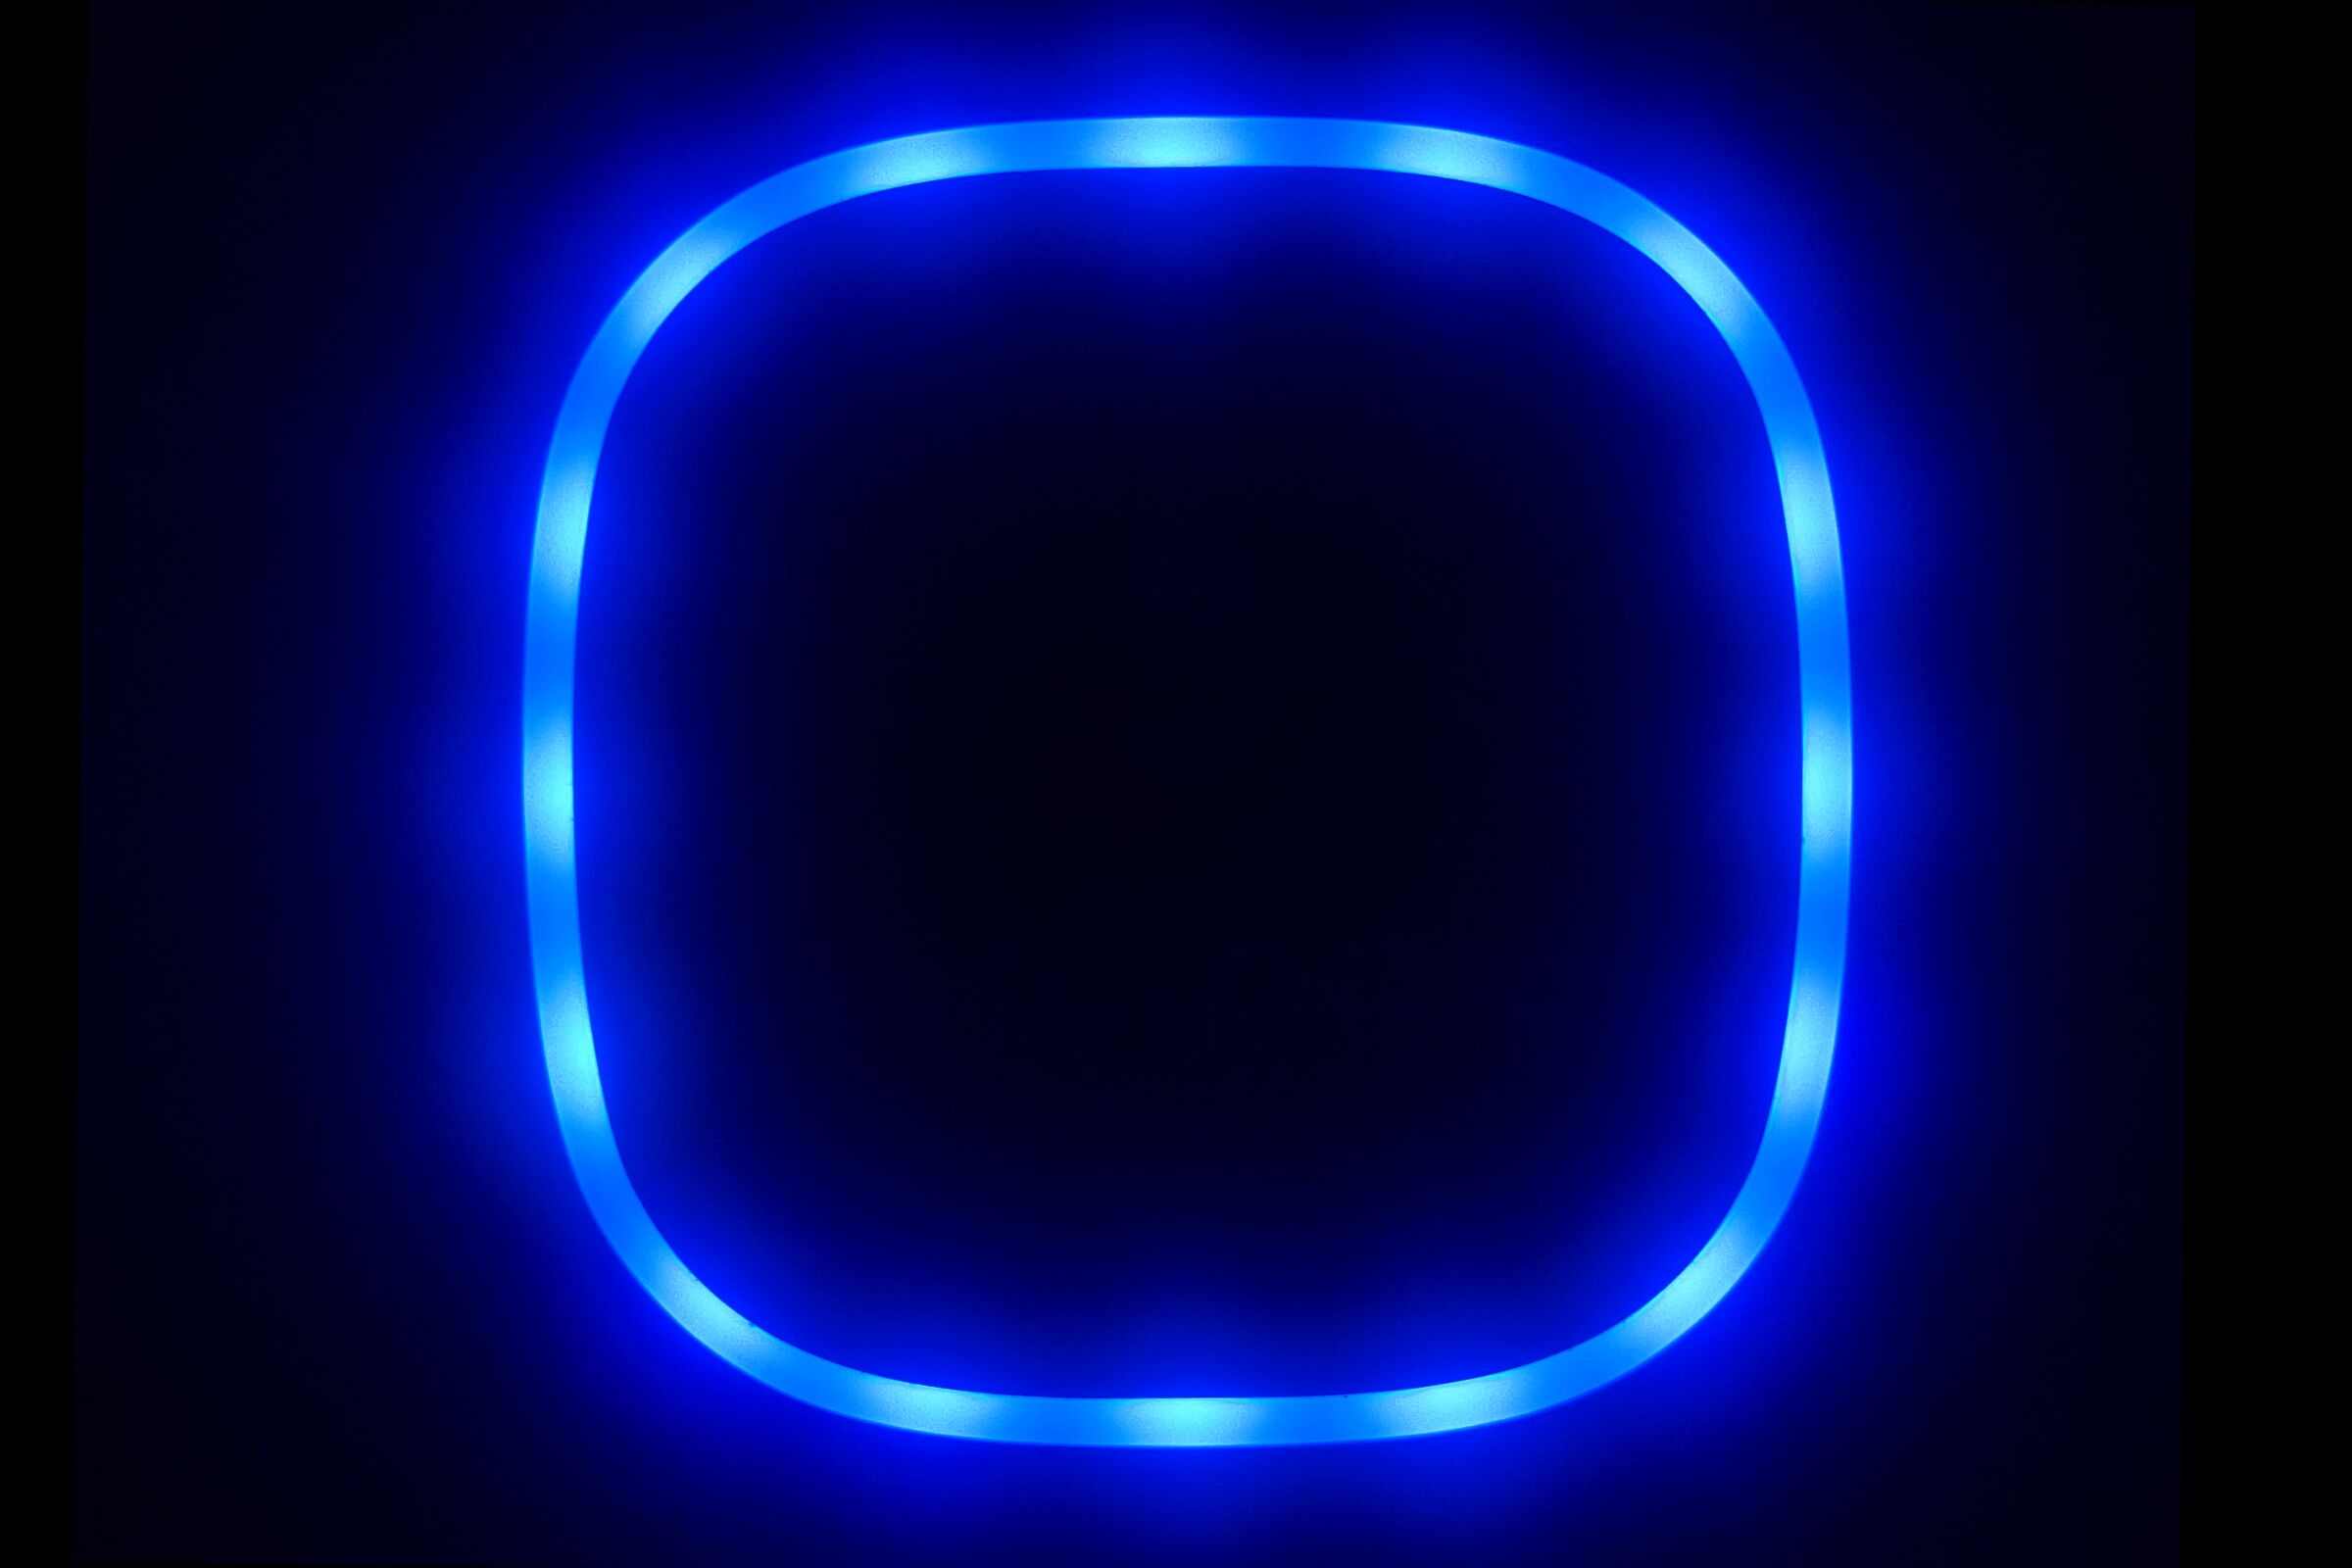 A glowing blue squared-off circle on the Wallbox home charger in a garage at night